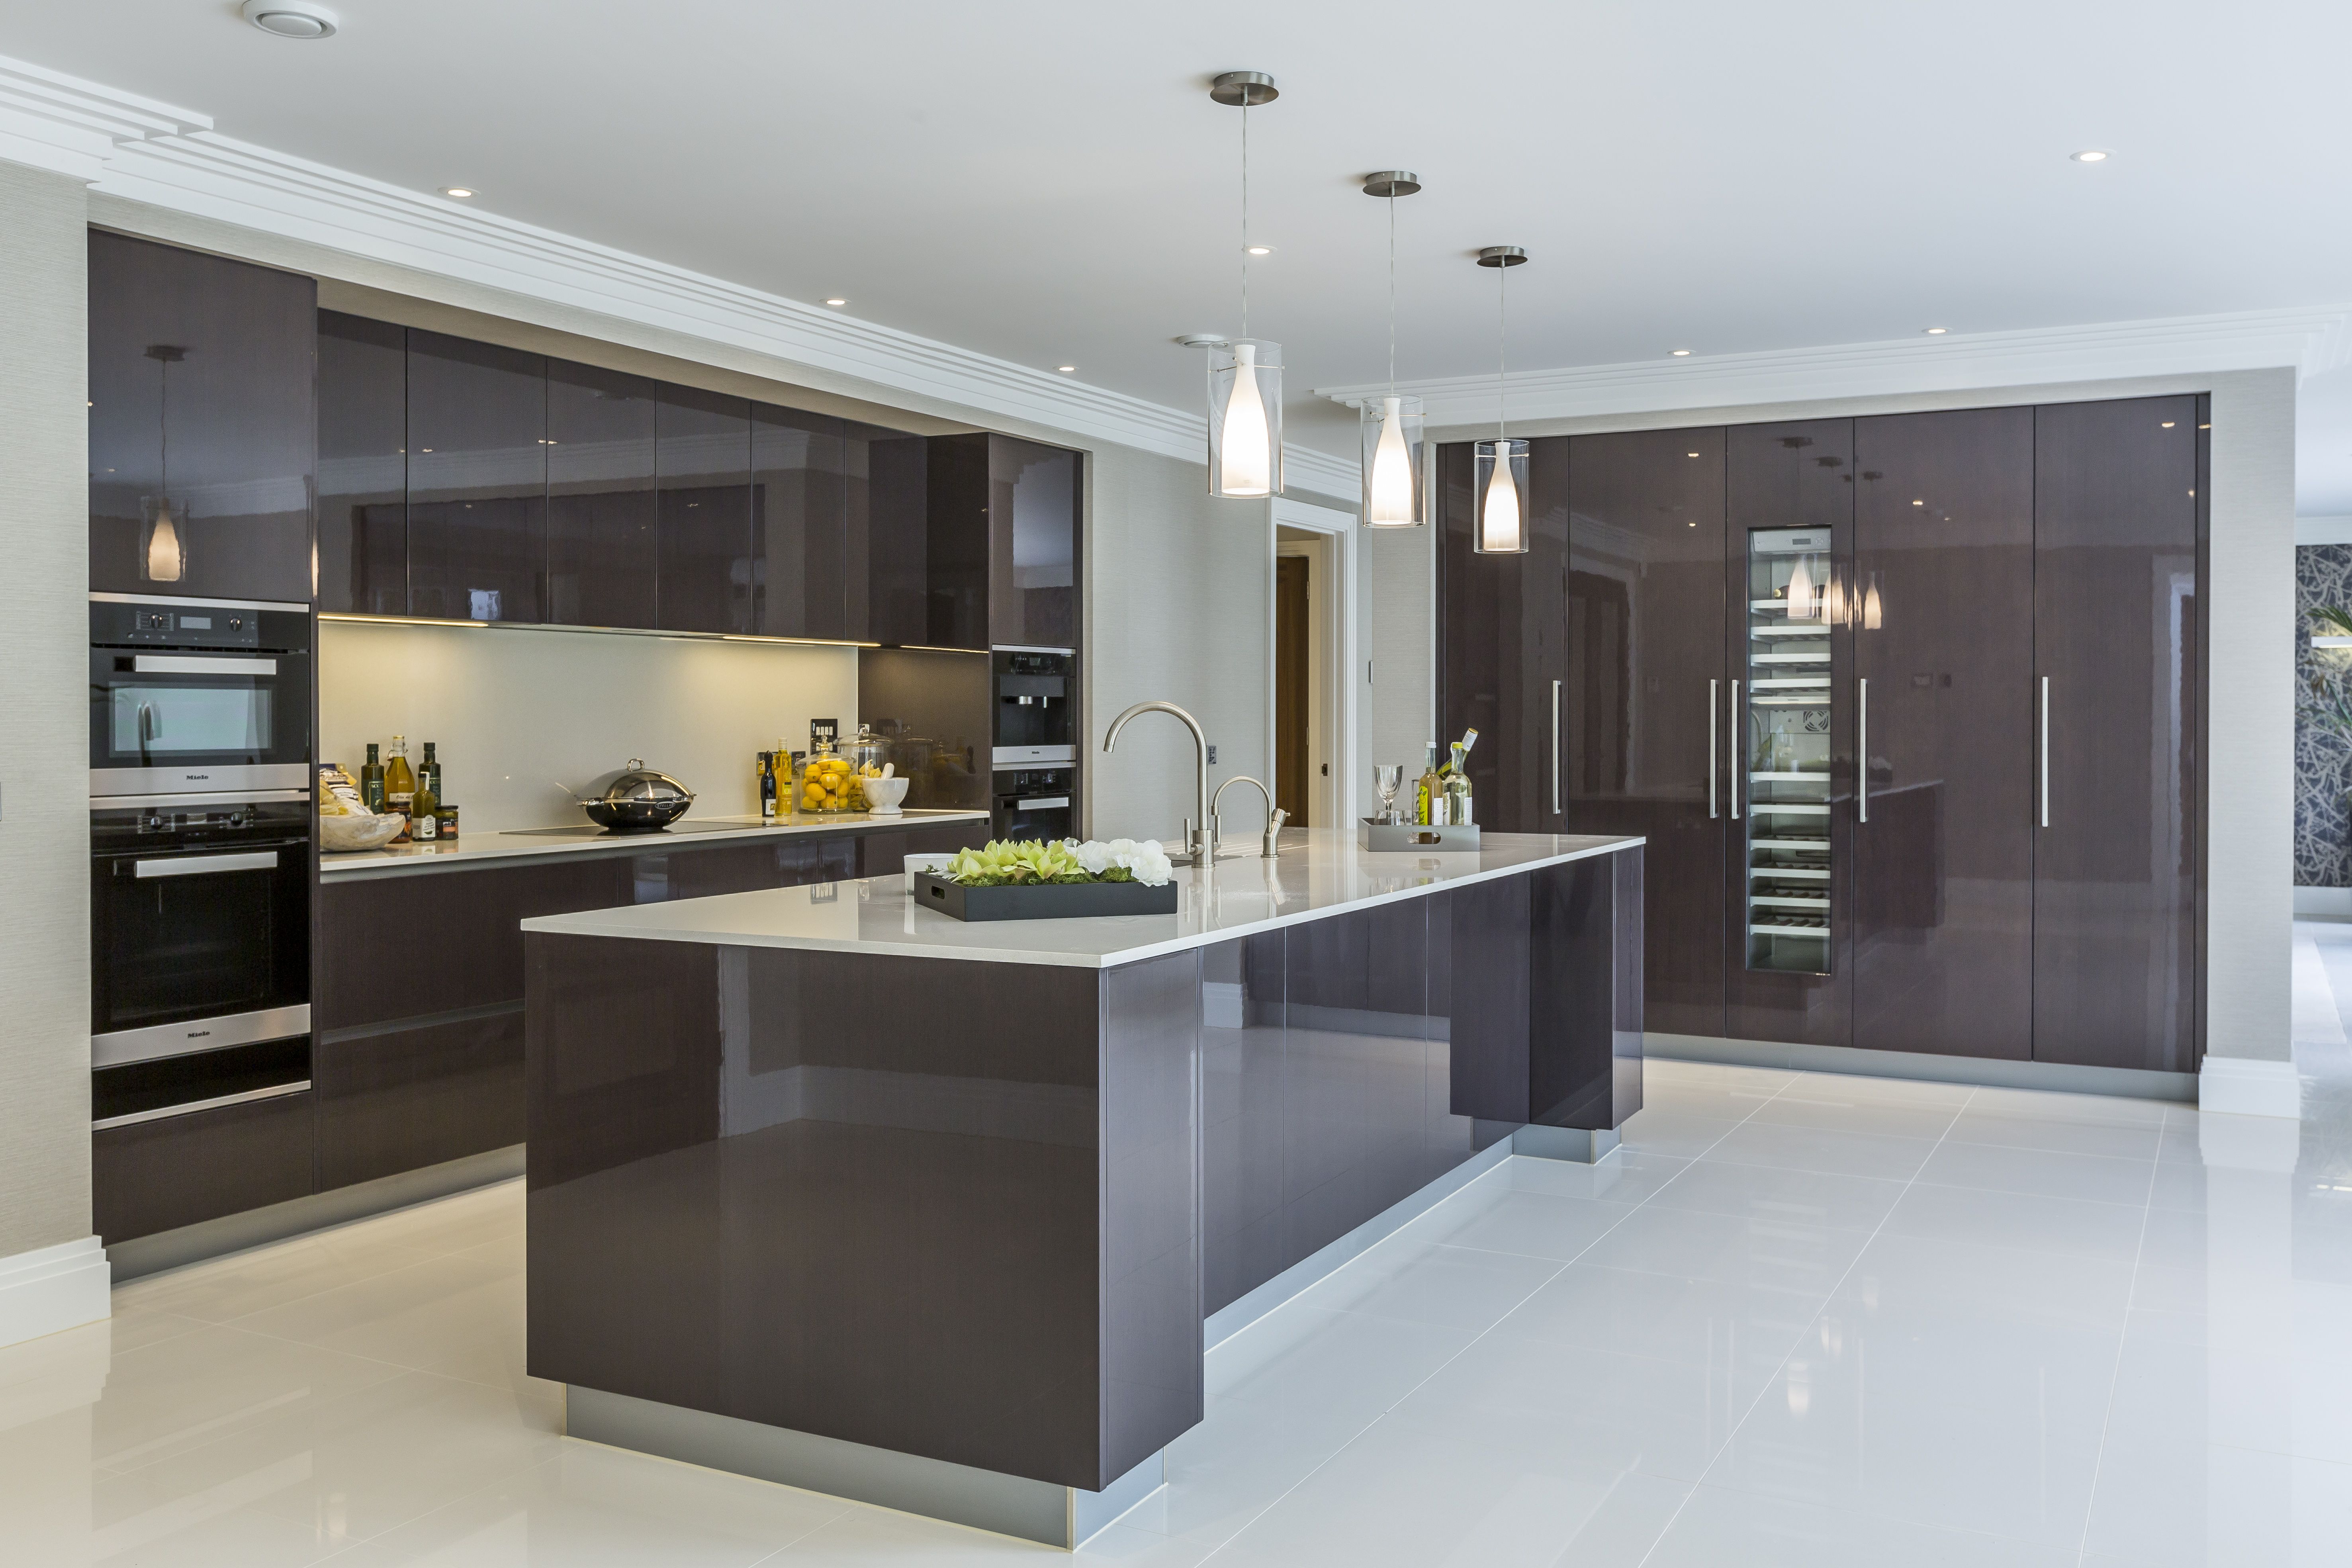 High gloss kitchens extreme contemporary minimal high gloss kitchen design in private mansion. TGPYUOM